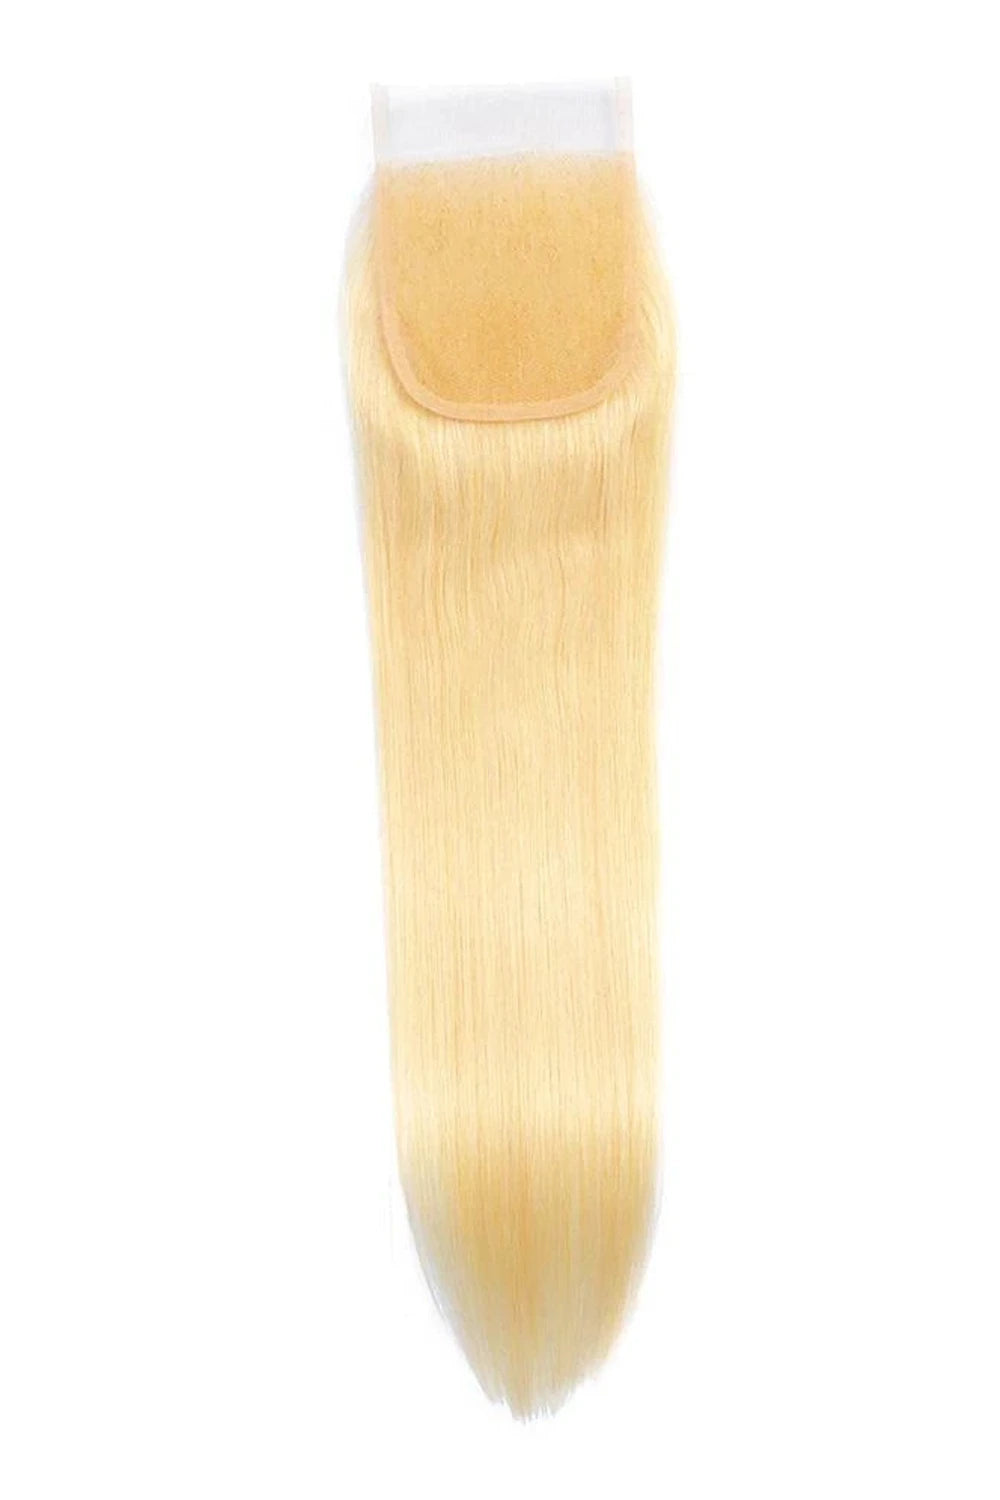 5x5-blonde-hd-lace-closure-straight-virgin-hair-for-wig-making-2